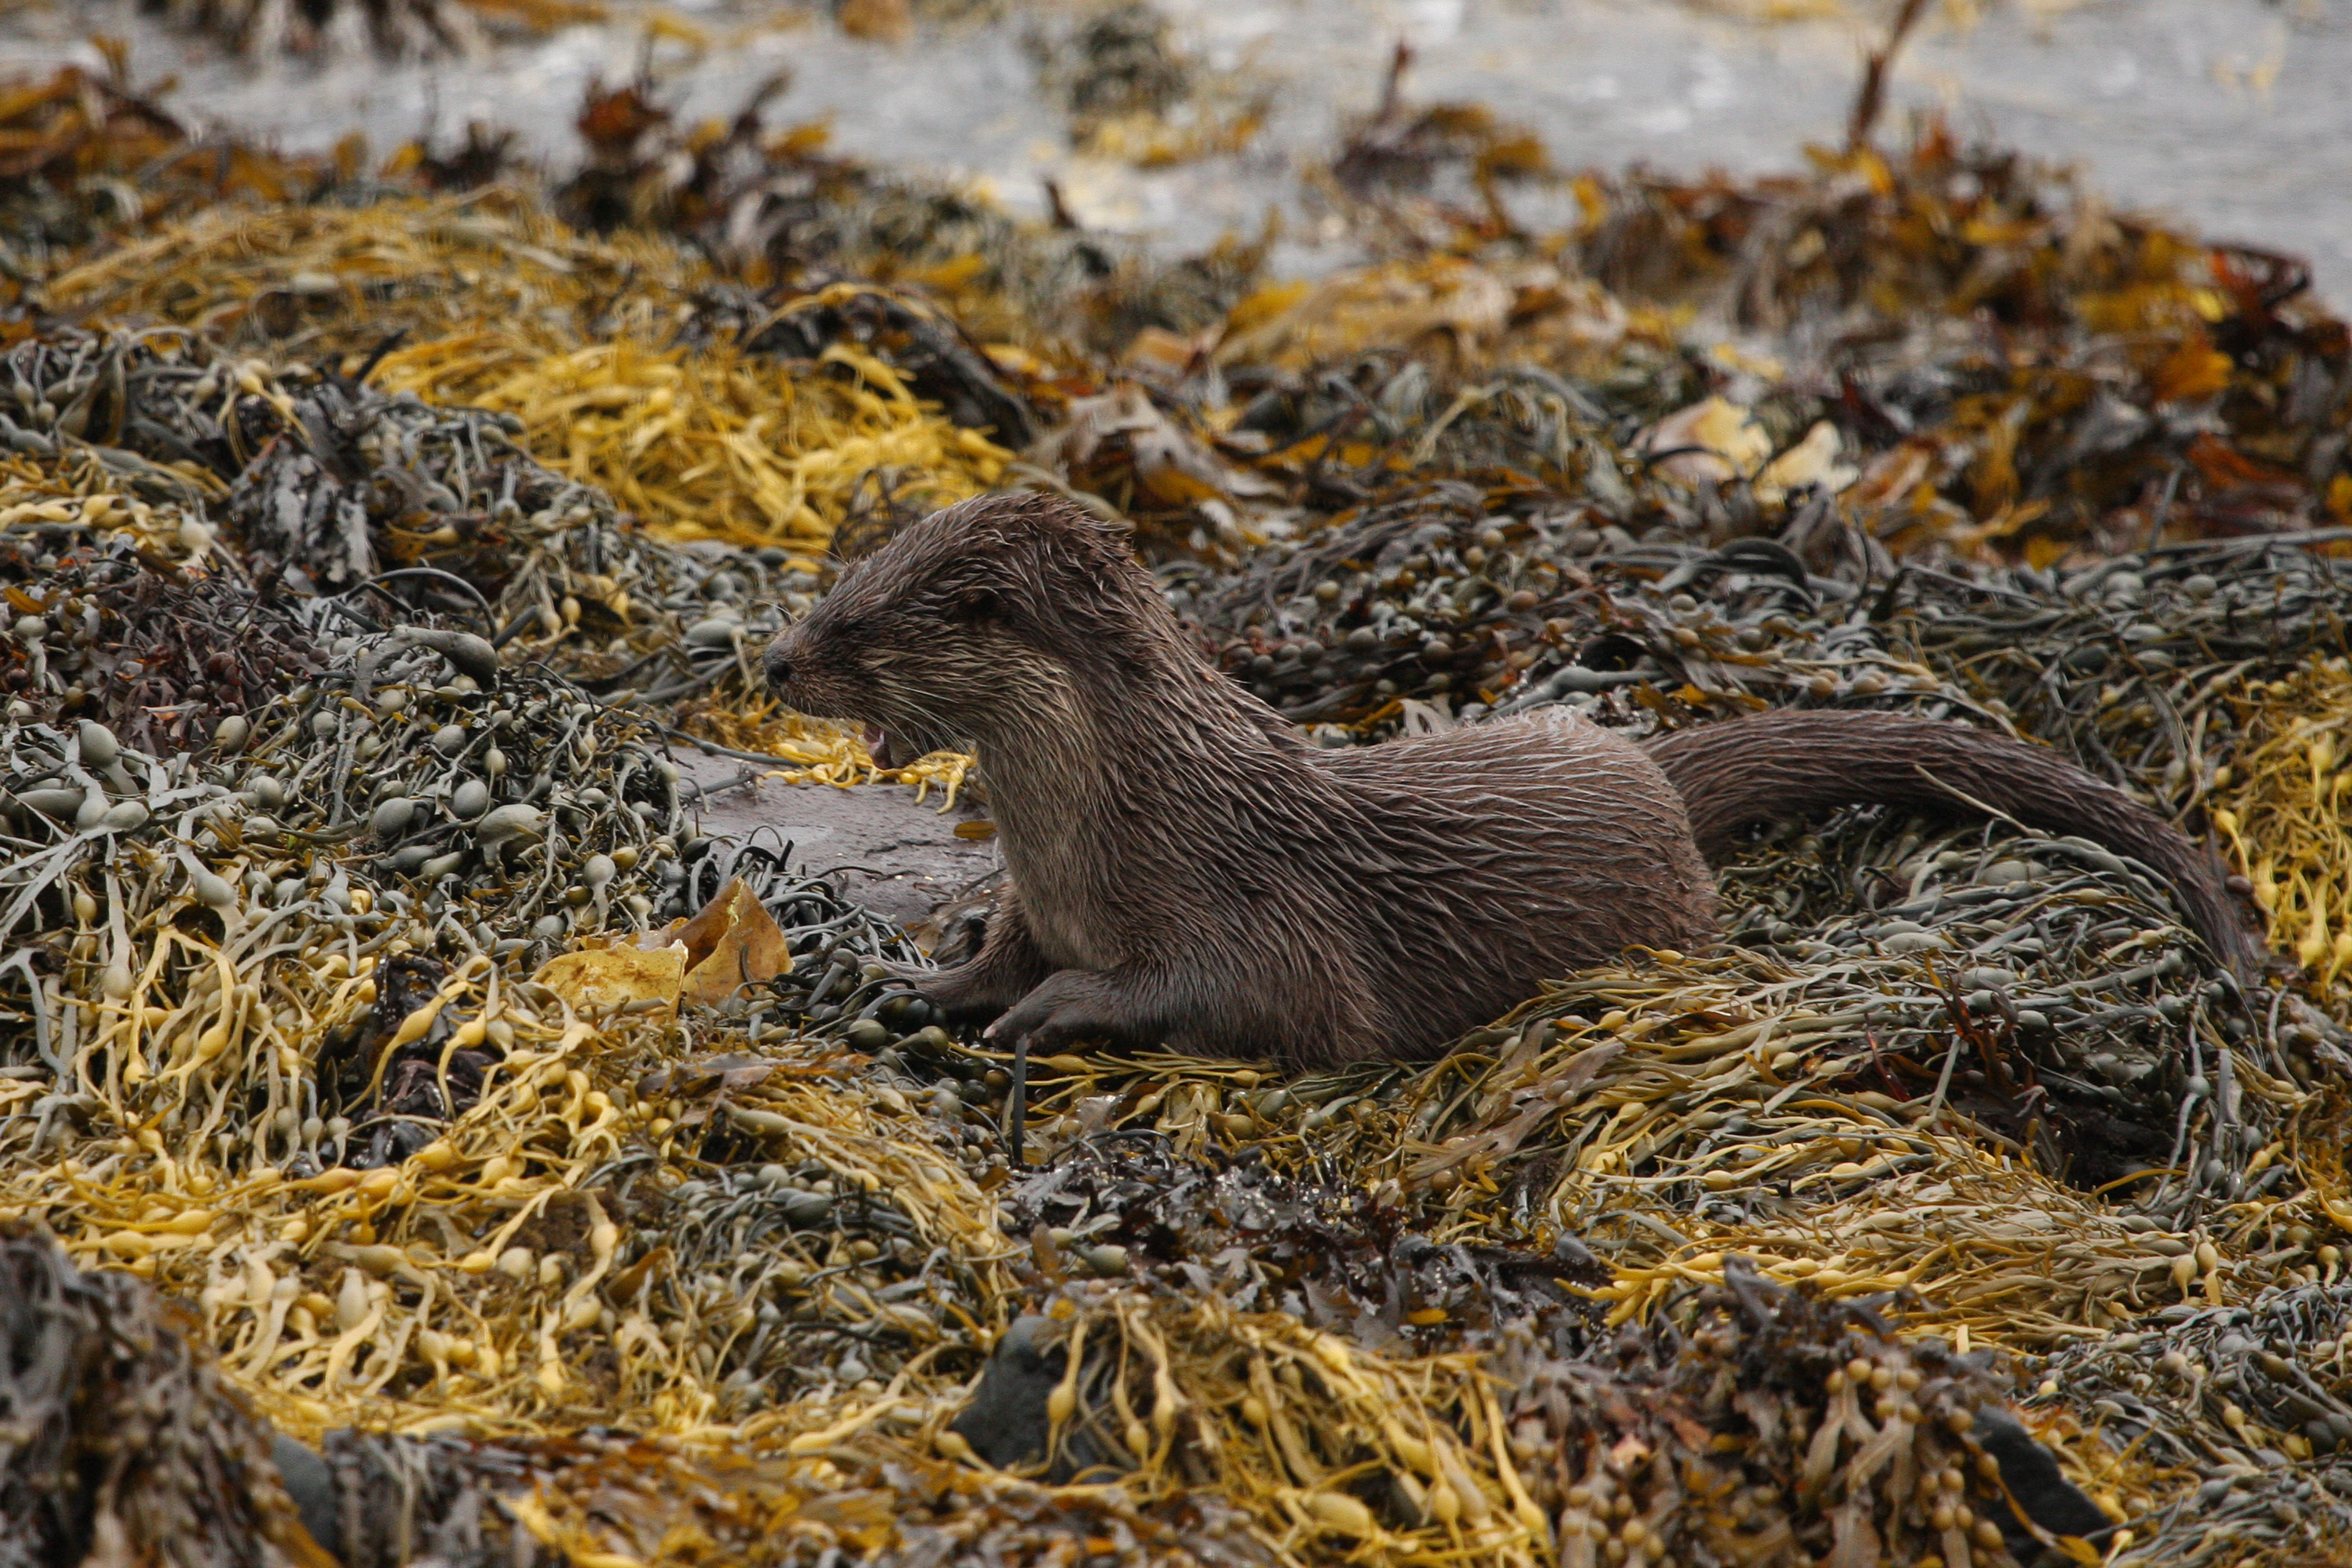 Young otter eating